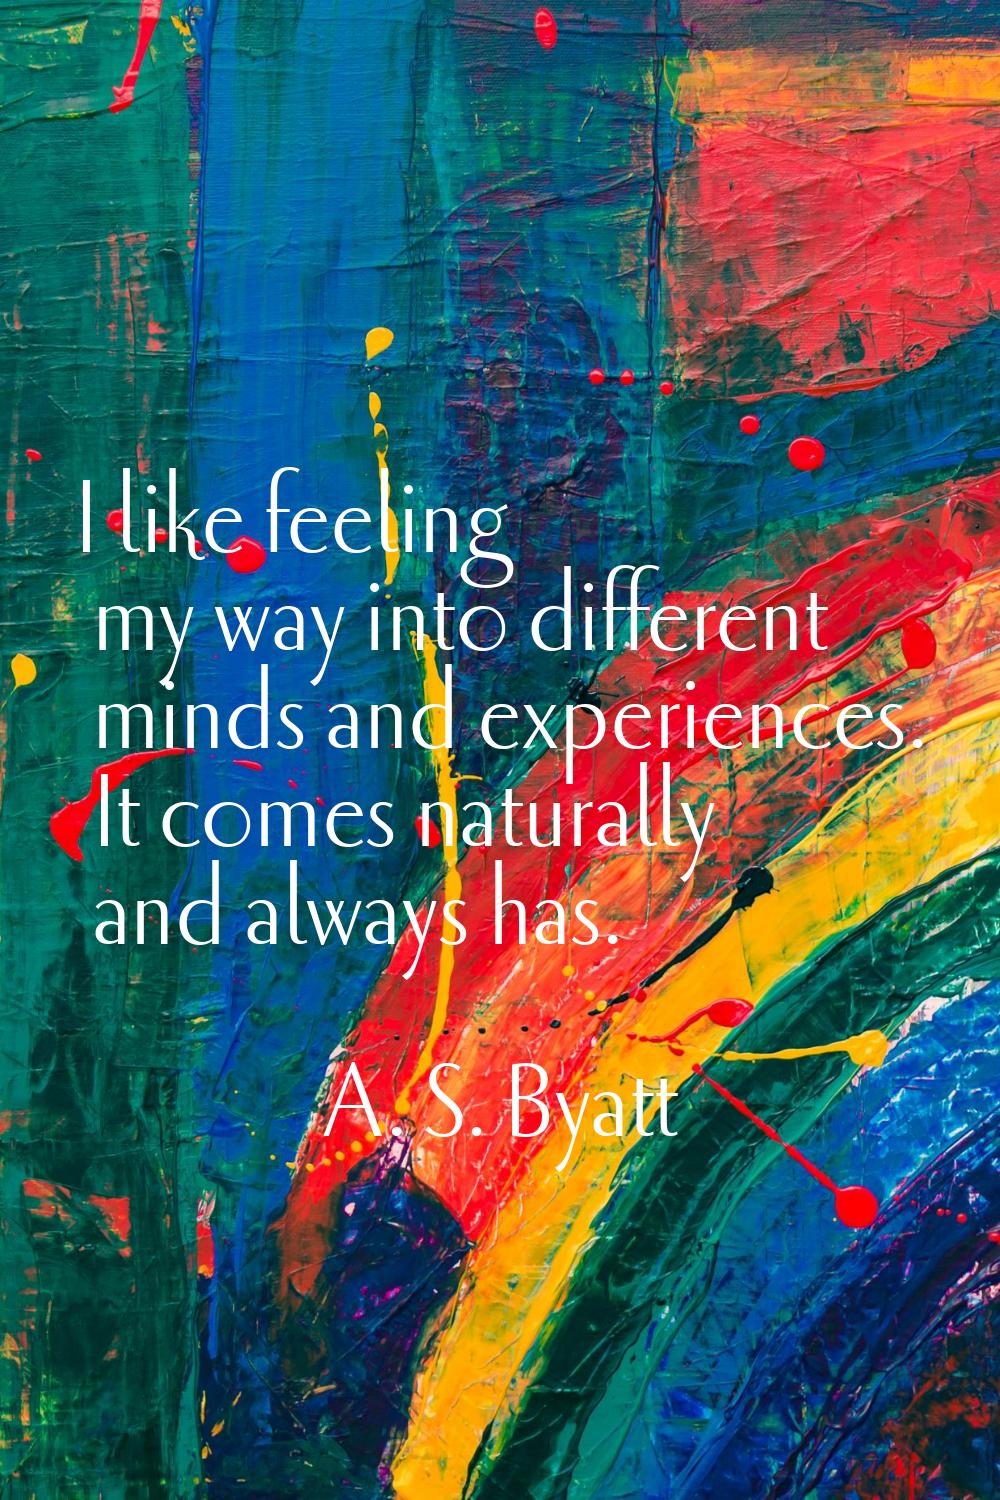 I like feeling my way into different minds and experiences. It comes naturally and always has.